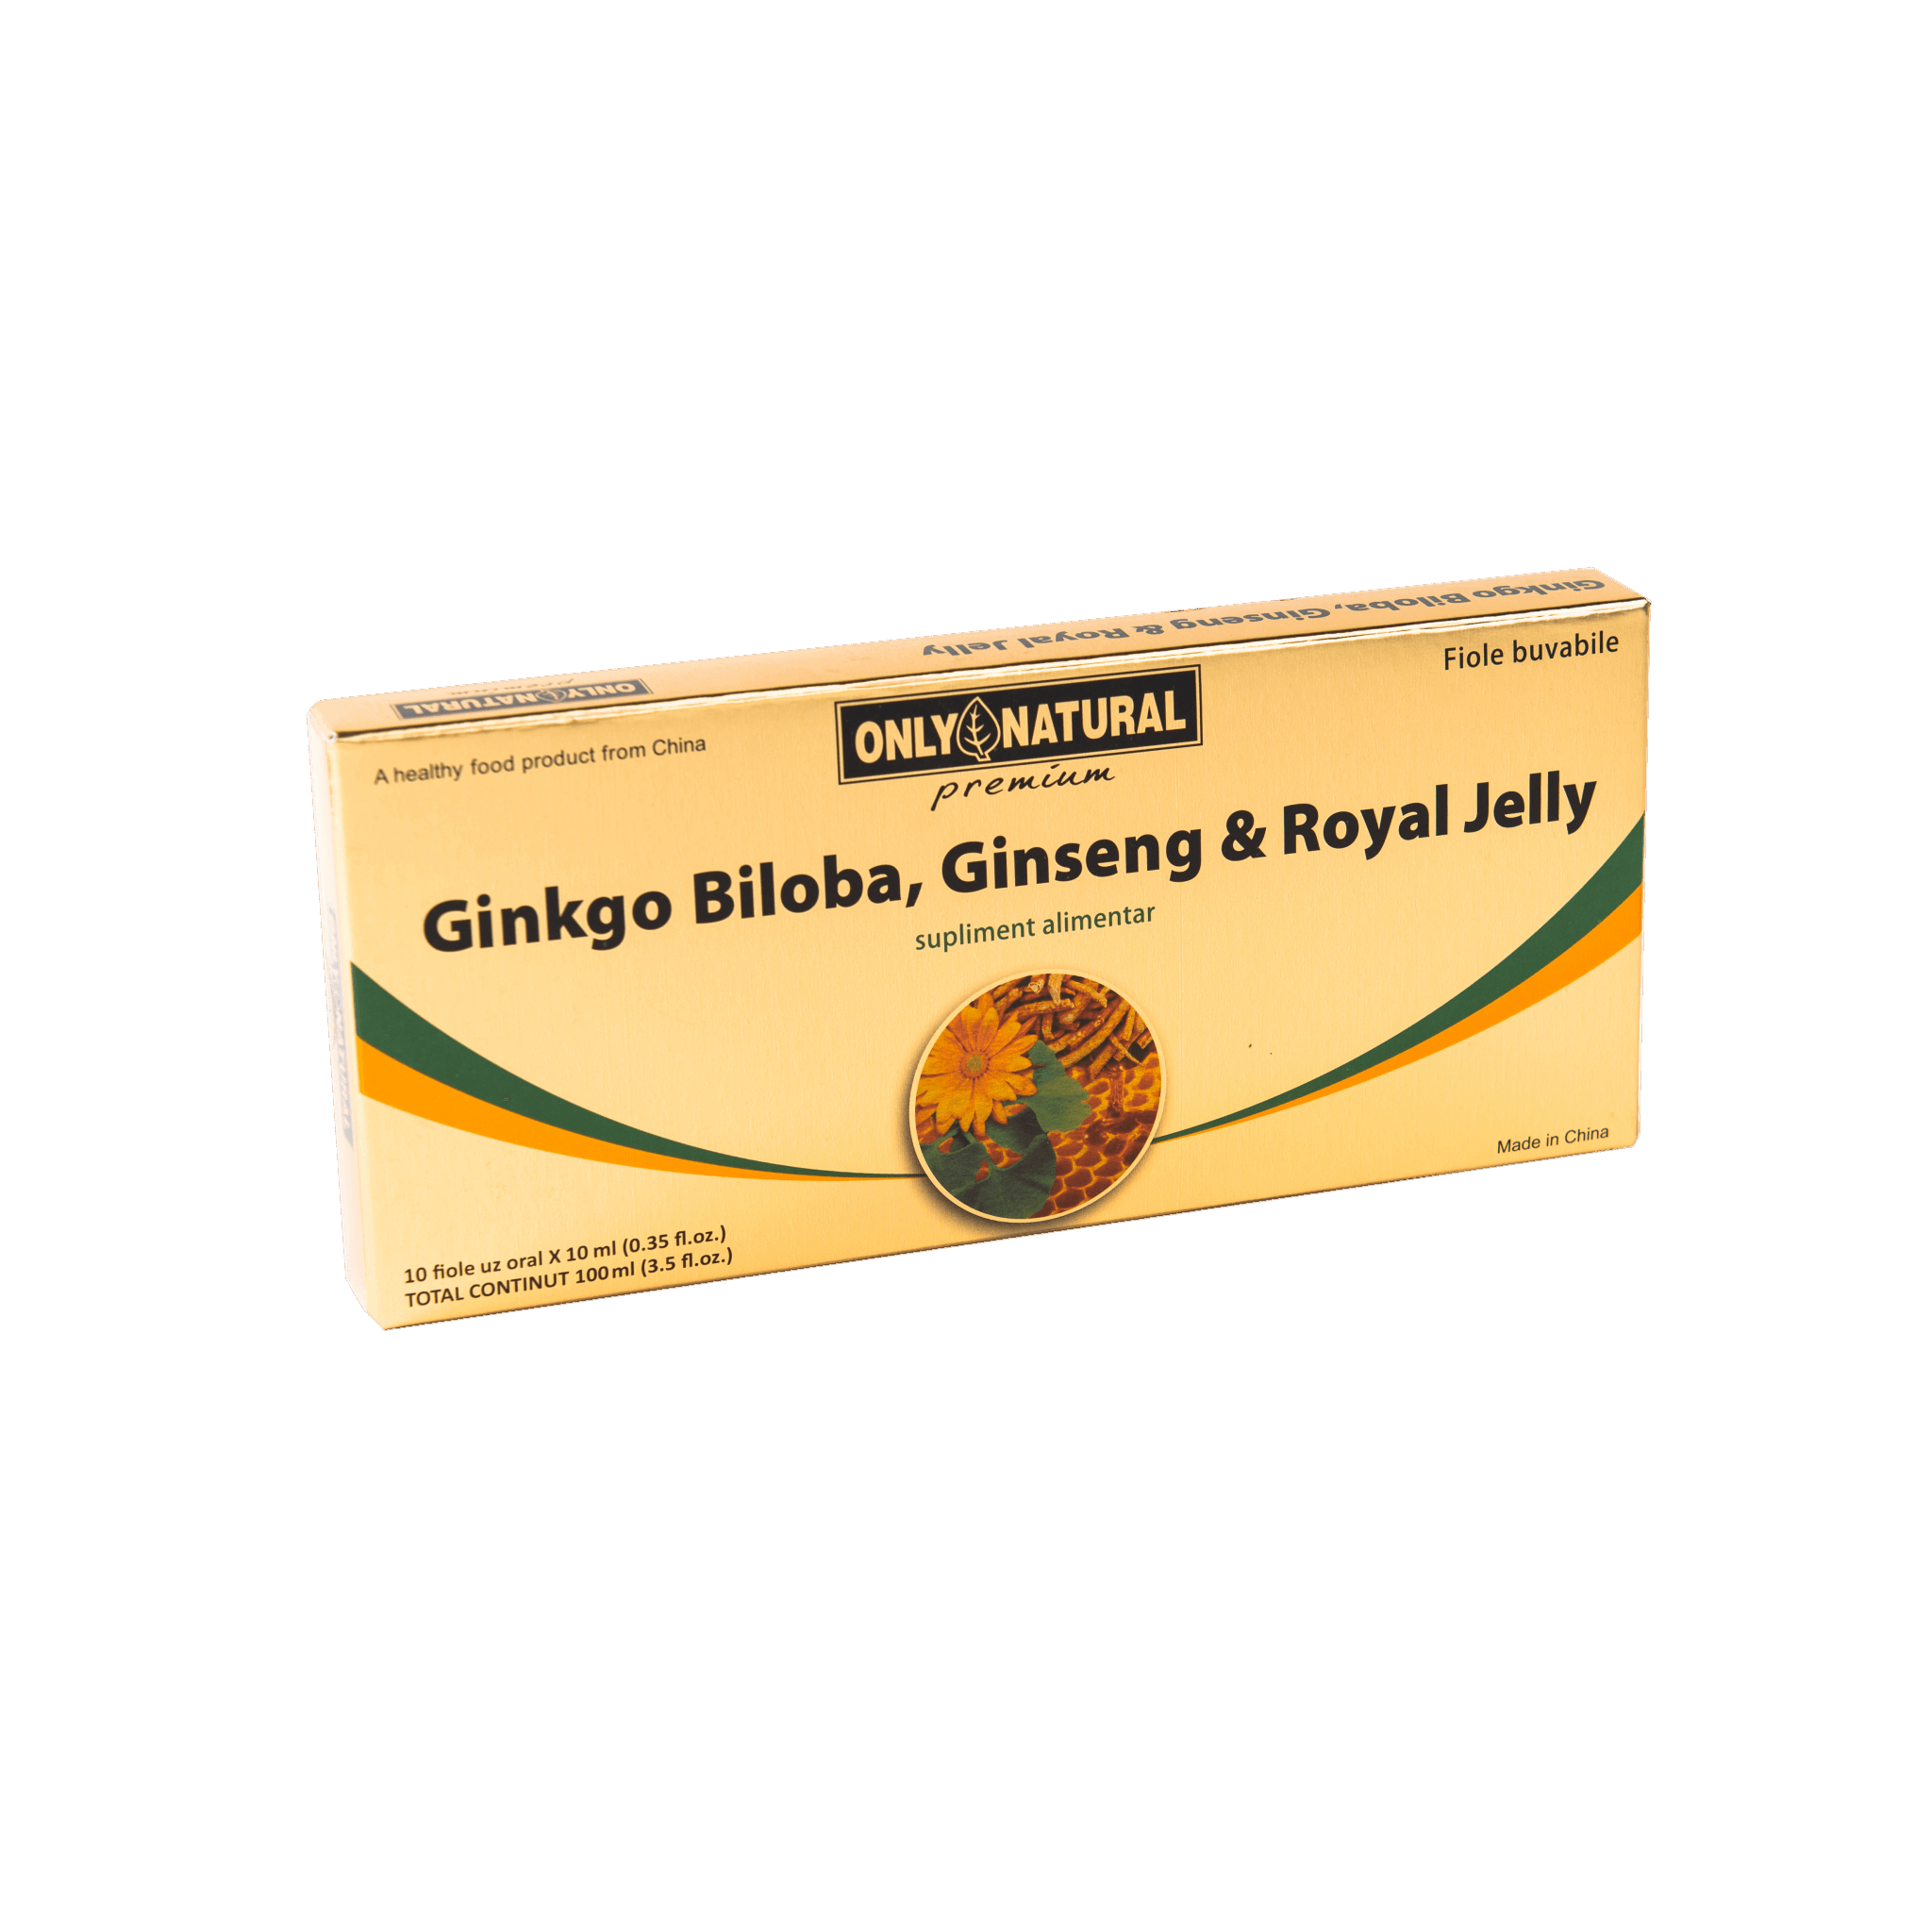 ONLY NATURAL GINKGO BILOBA + GINSENG + ROYAL JELLY 10 FIOLE X 10ML Helpnet.ro